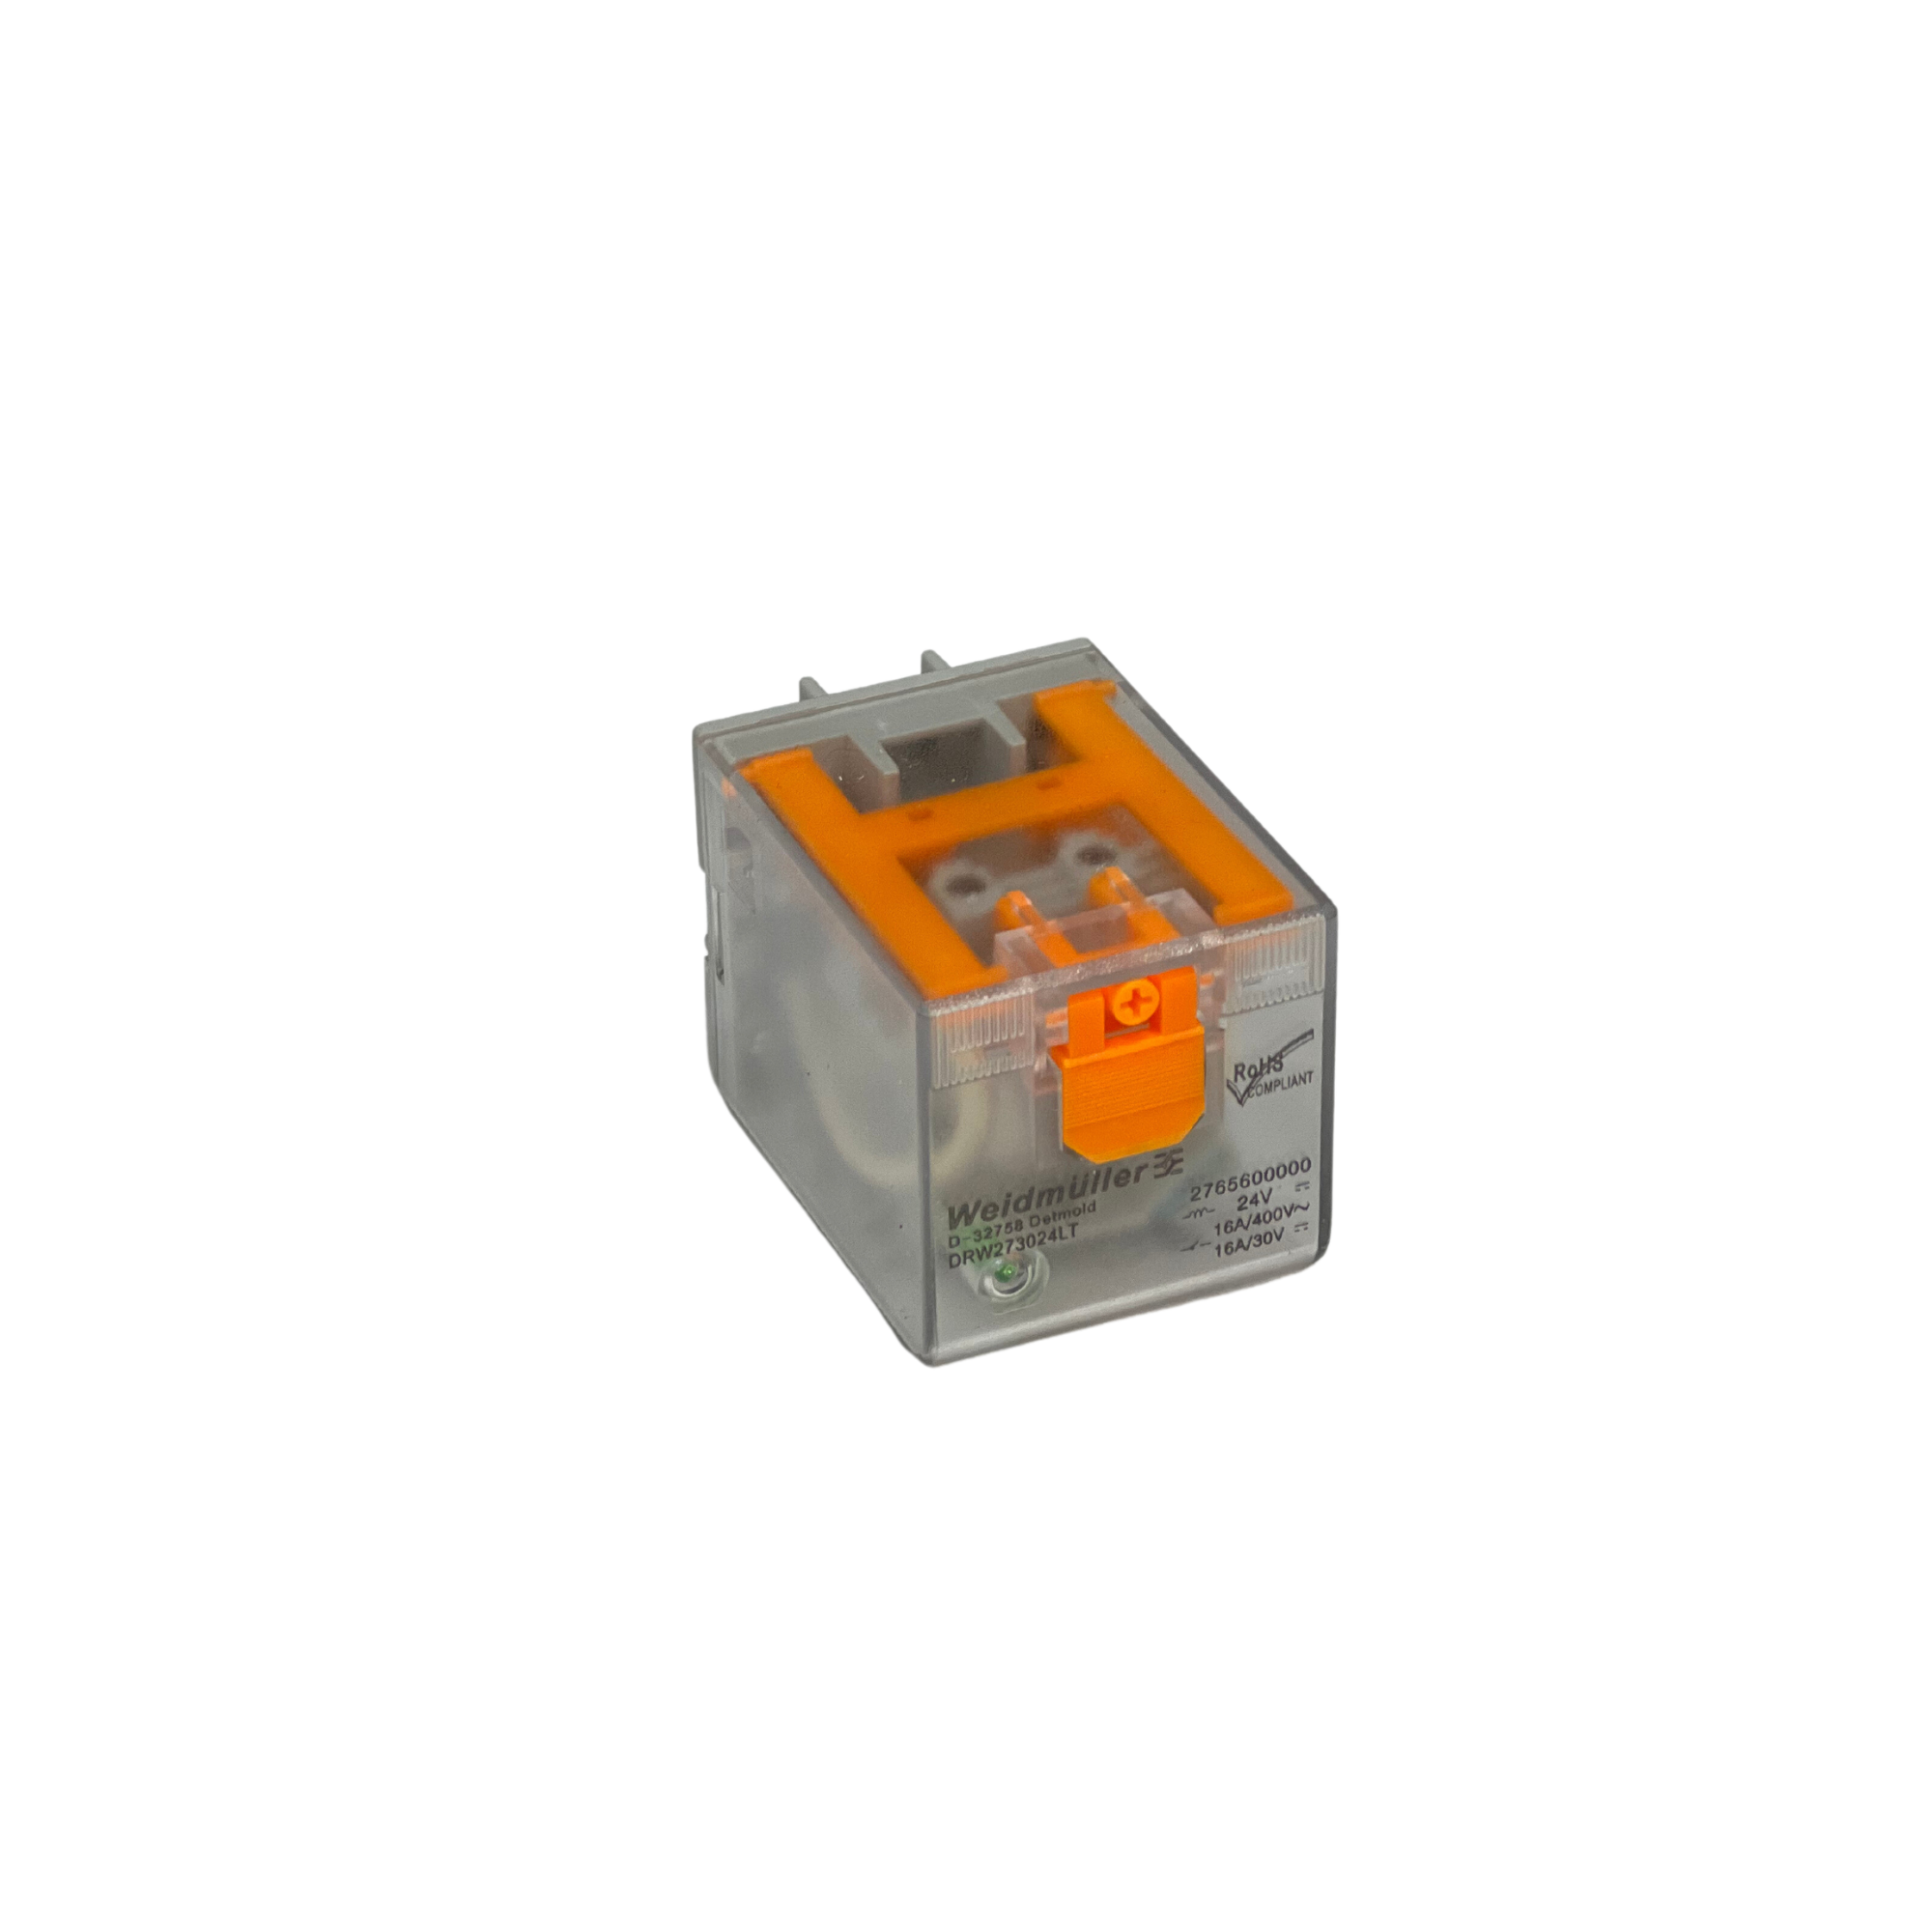 clear cube shaped relay with 4 prongs on back